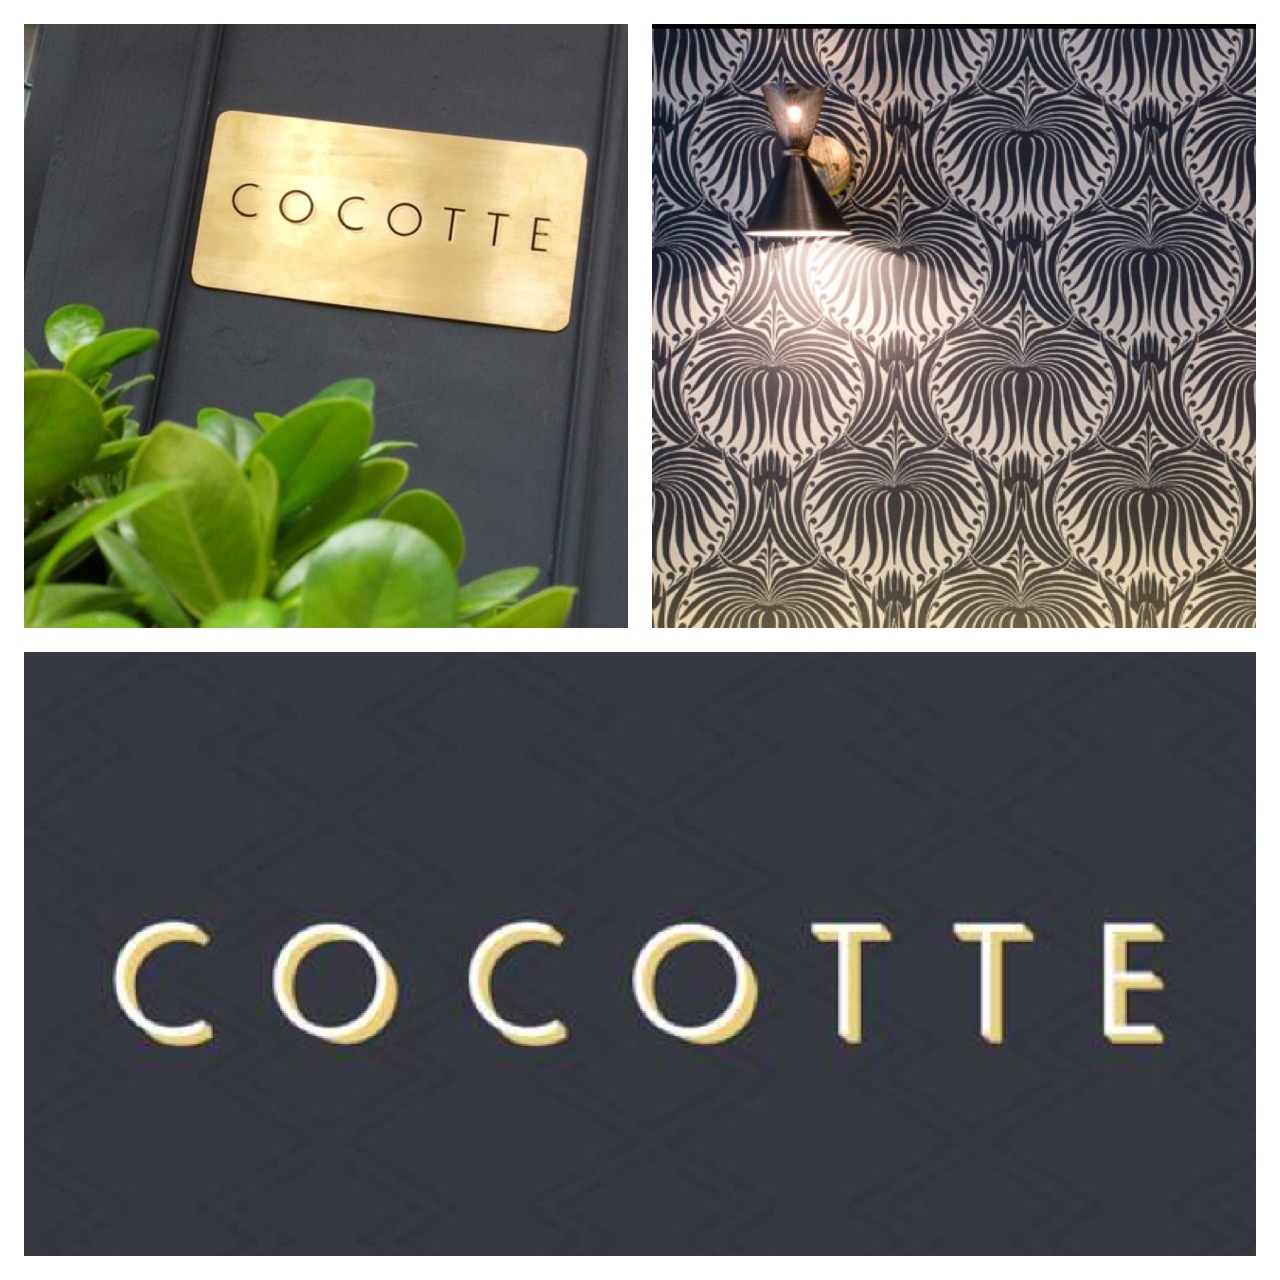 Cocotte, the Frenchy restaurant of Noho